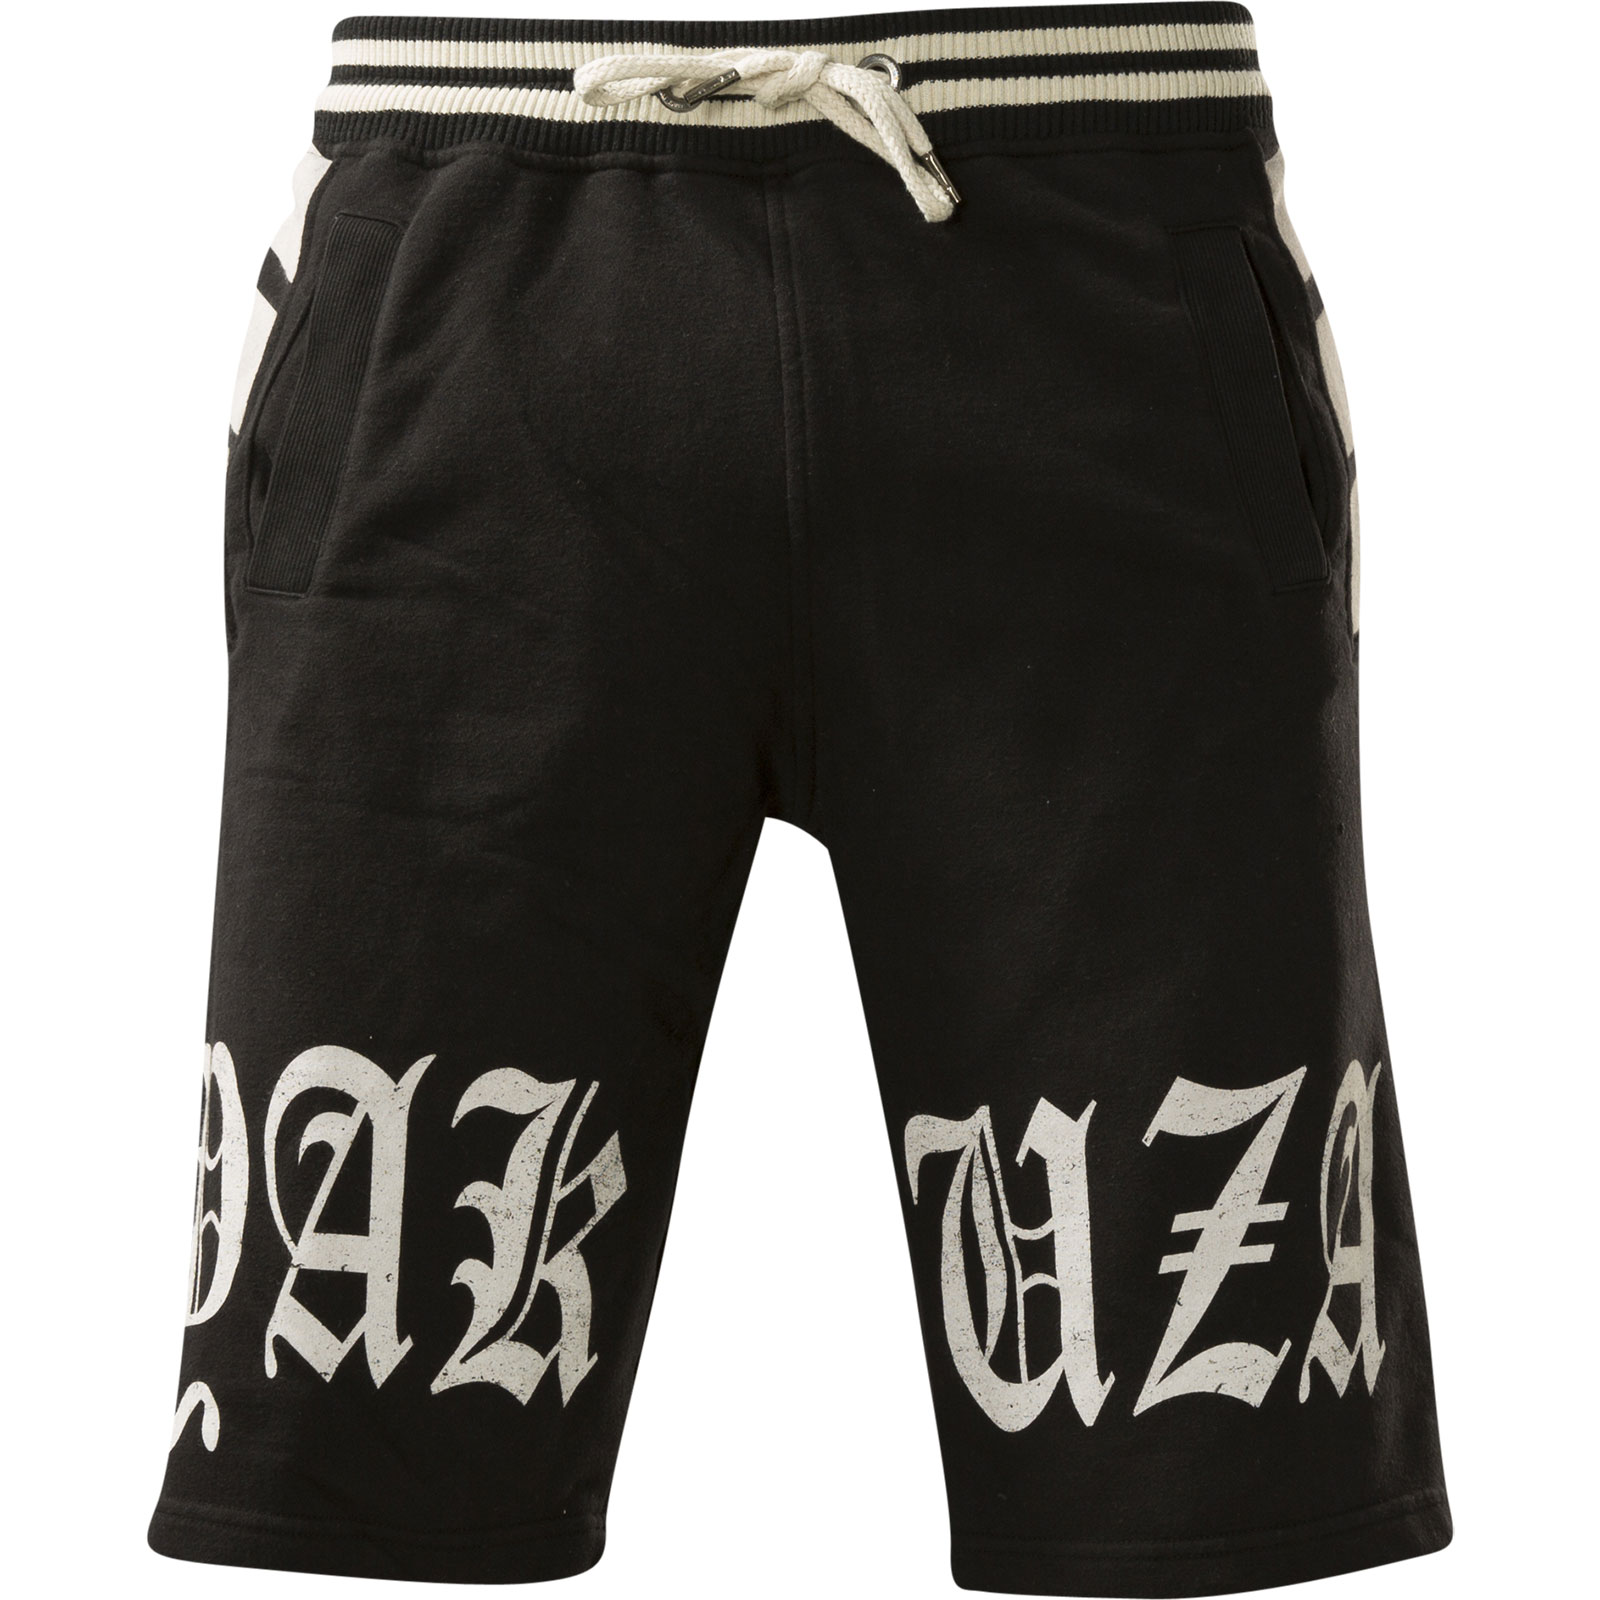 Yakuza Athelic Sweat Shorts SSB-120470 with a Skull and lettering